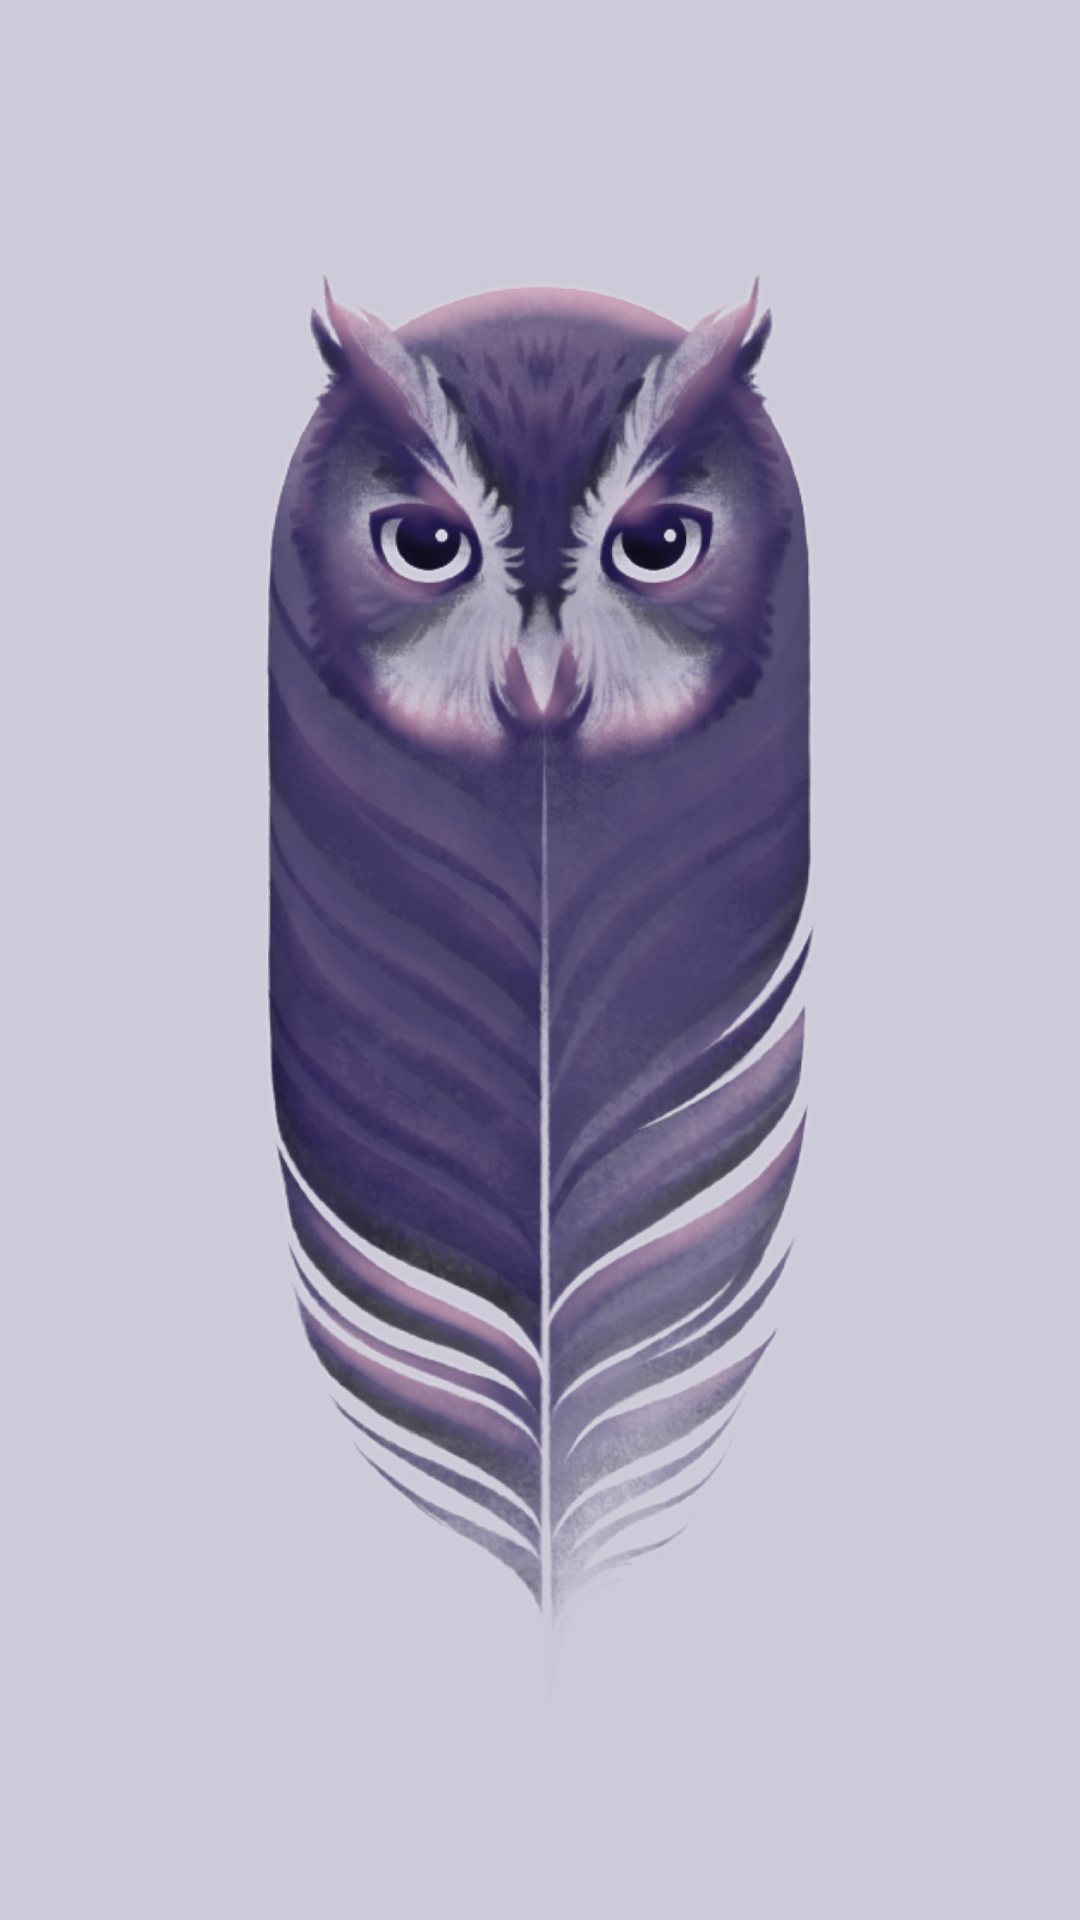 Owl Phone Wallpapers - 70 Nice Owls For Your Smartphone